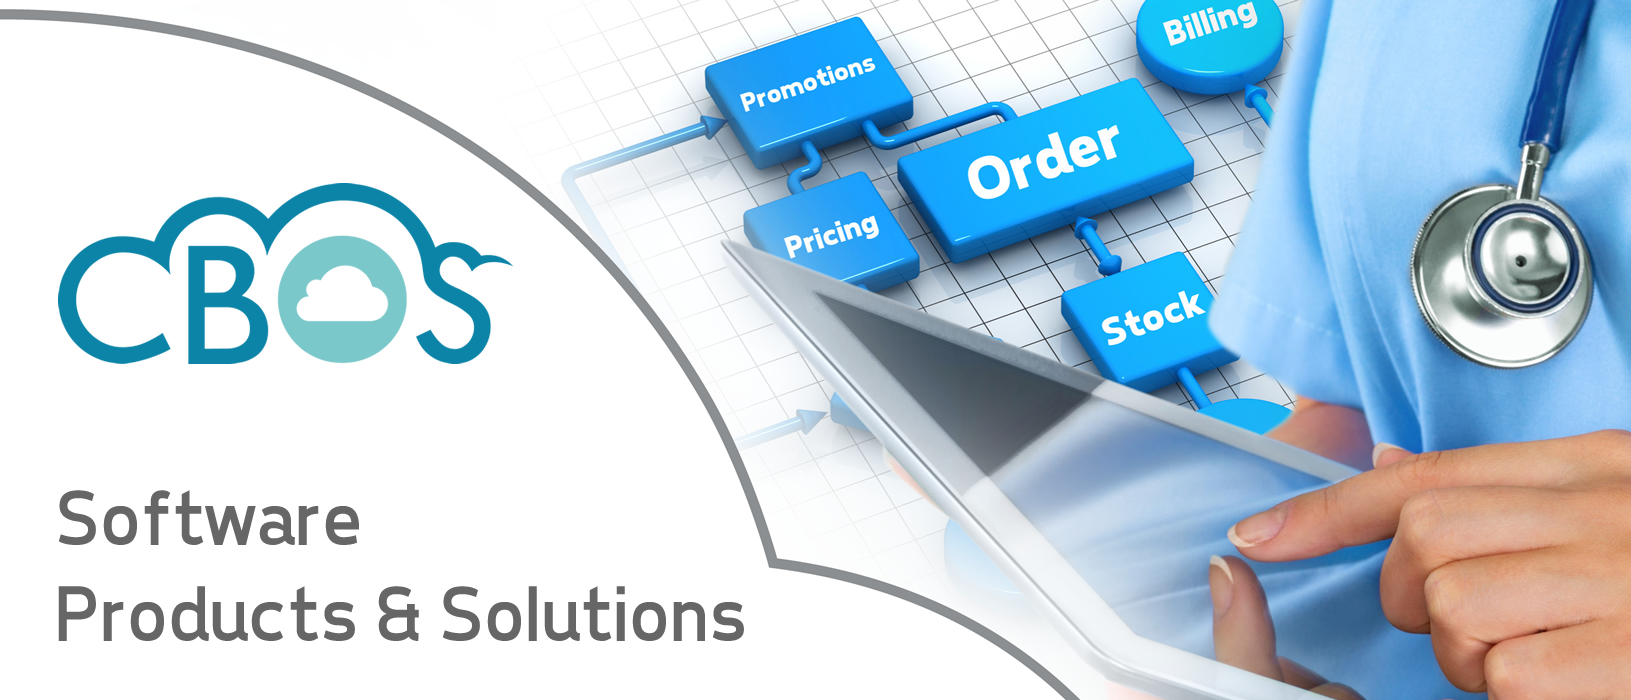 CBOS Software Products